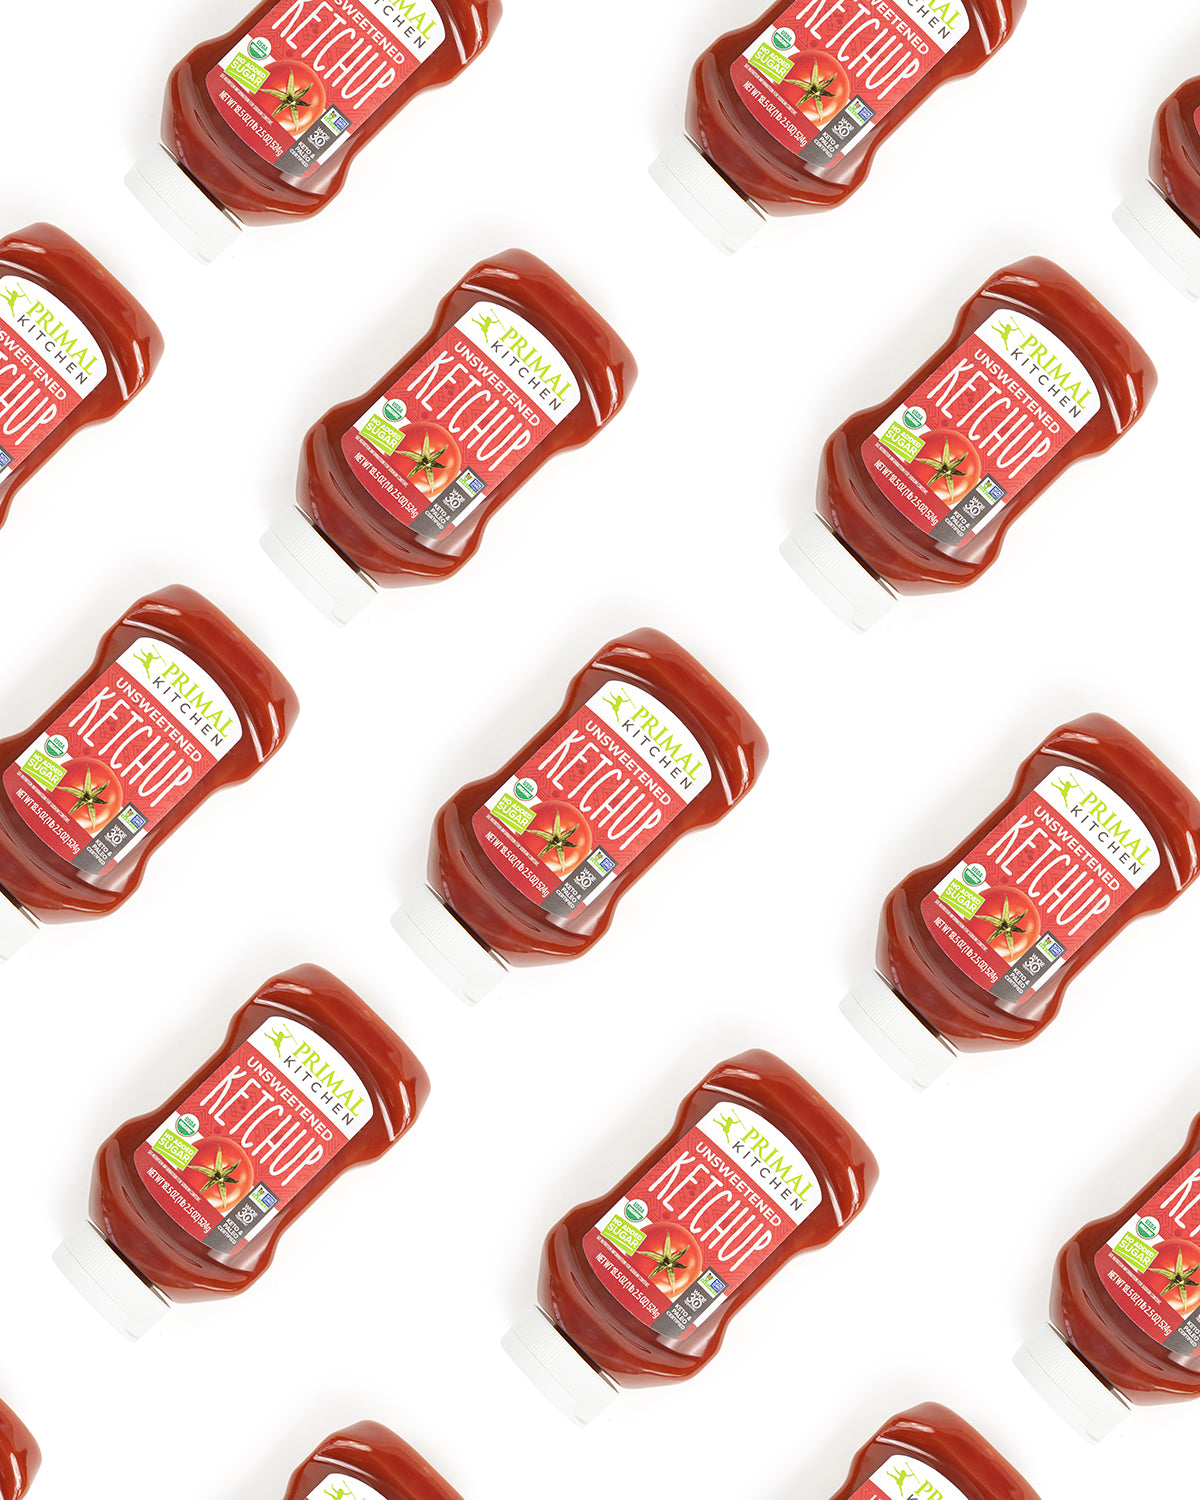 Staggered bottles of Primal Kitchen Unsweetened Squeeze Ketchup on a white background